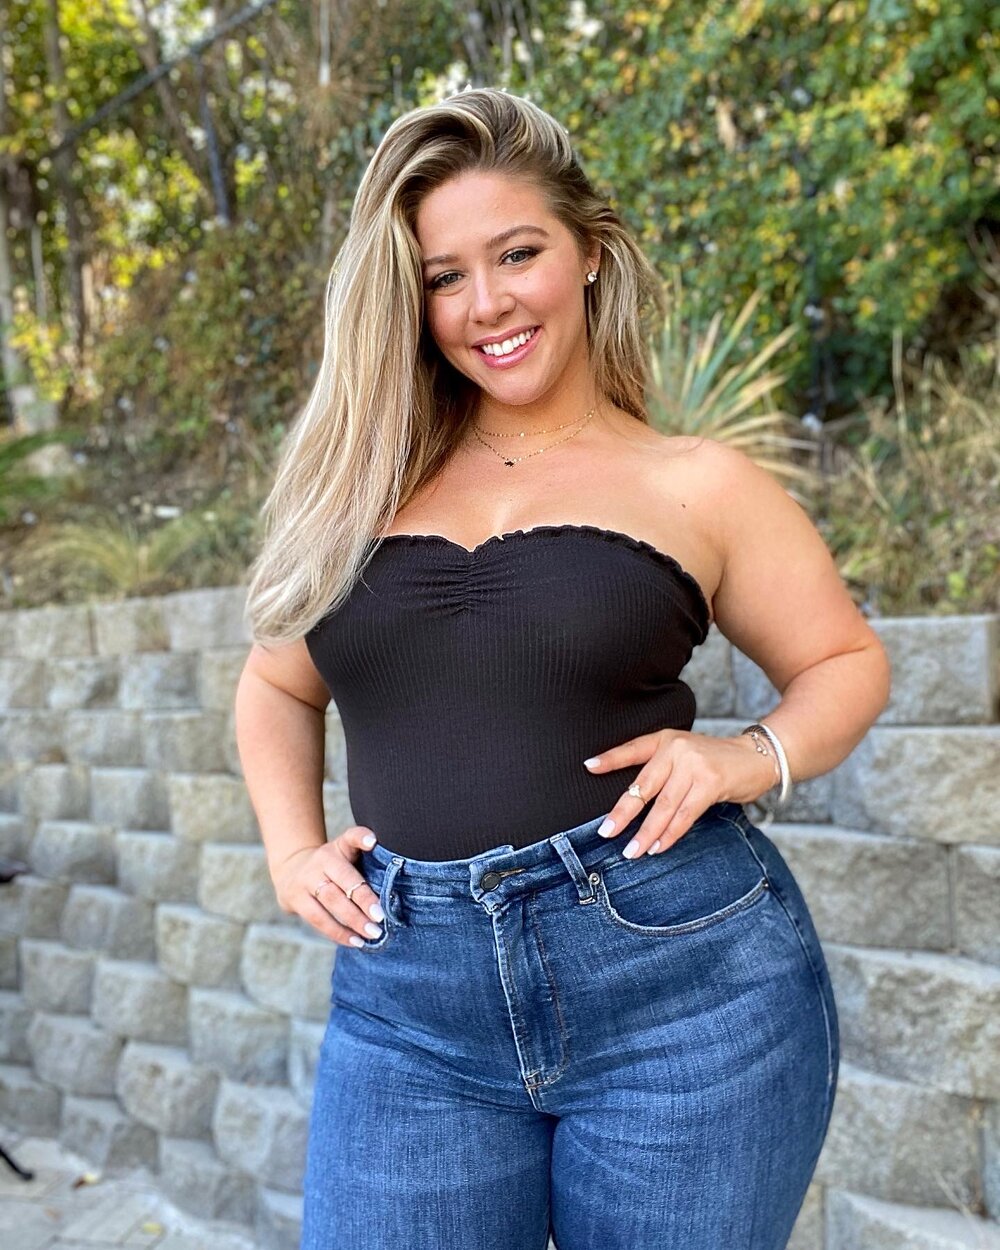 Ellana Bryan Is An Ameican Plus Size Model And Instagarm Star 